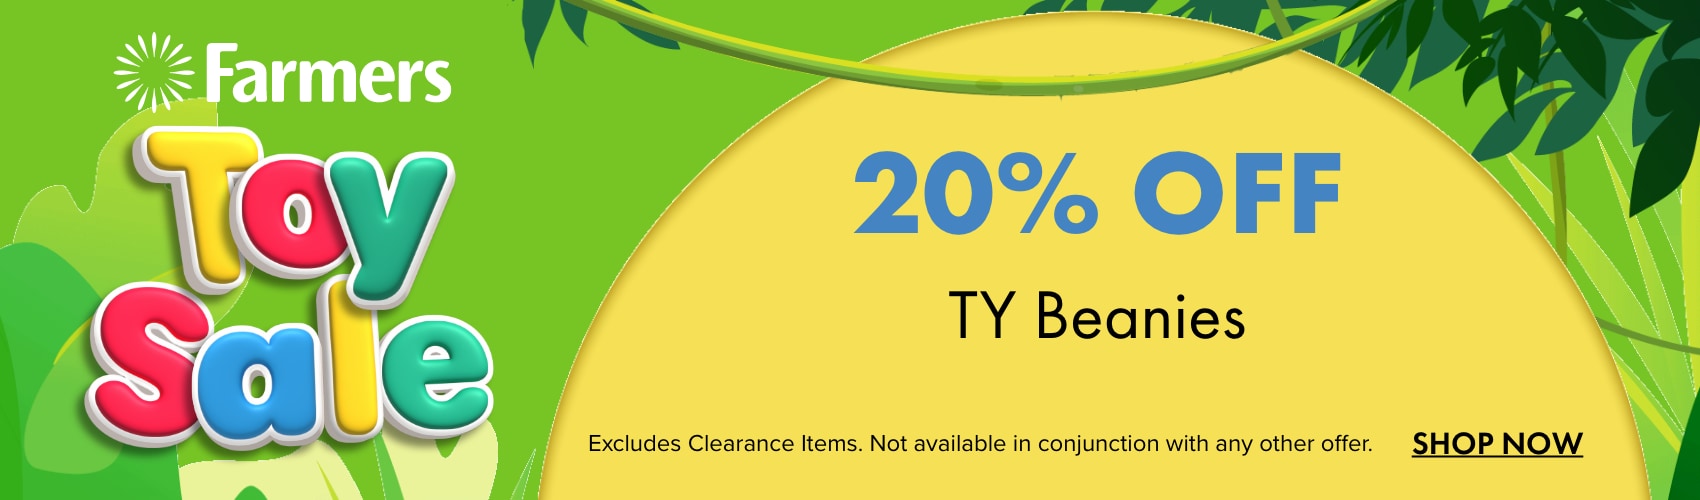 20% OFF TY Beanies